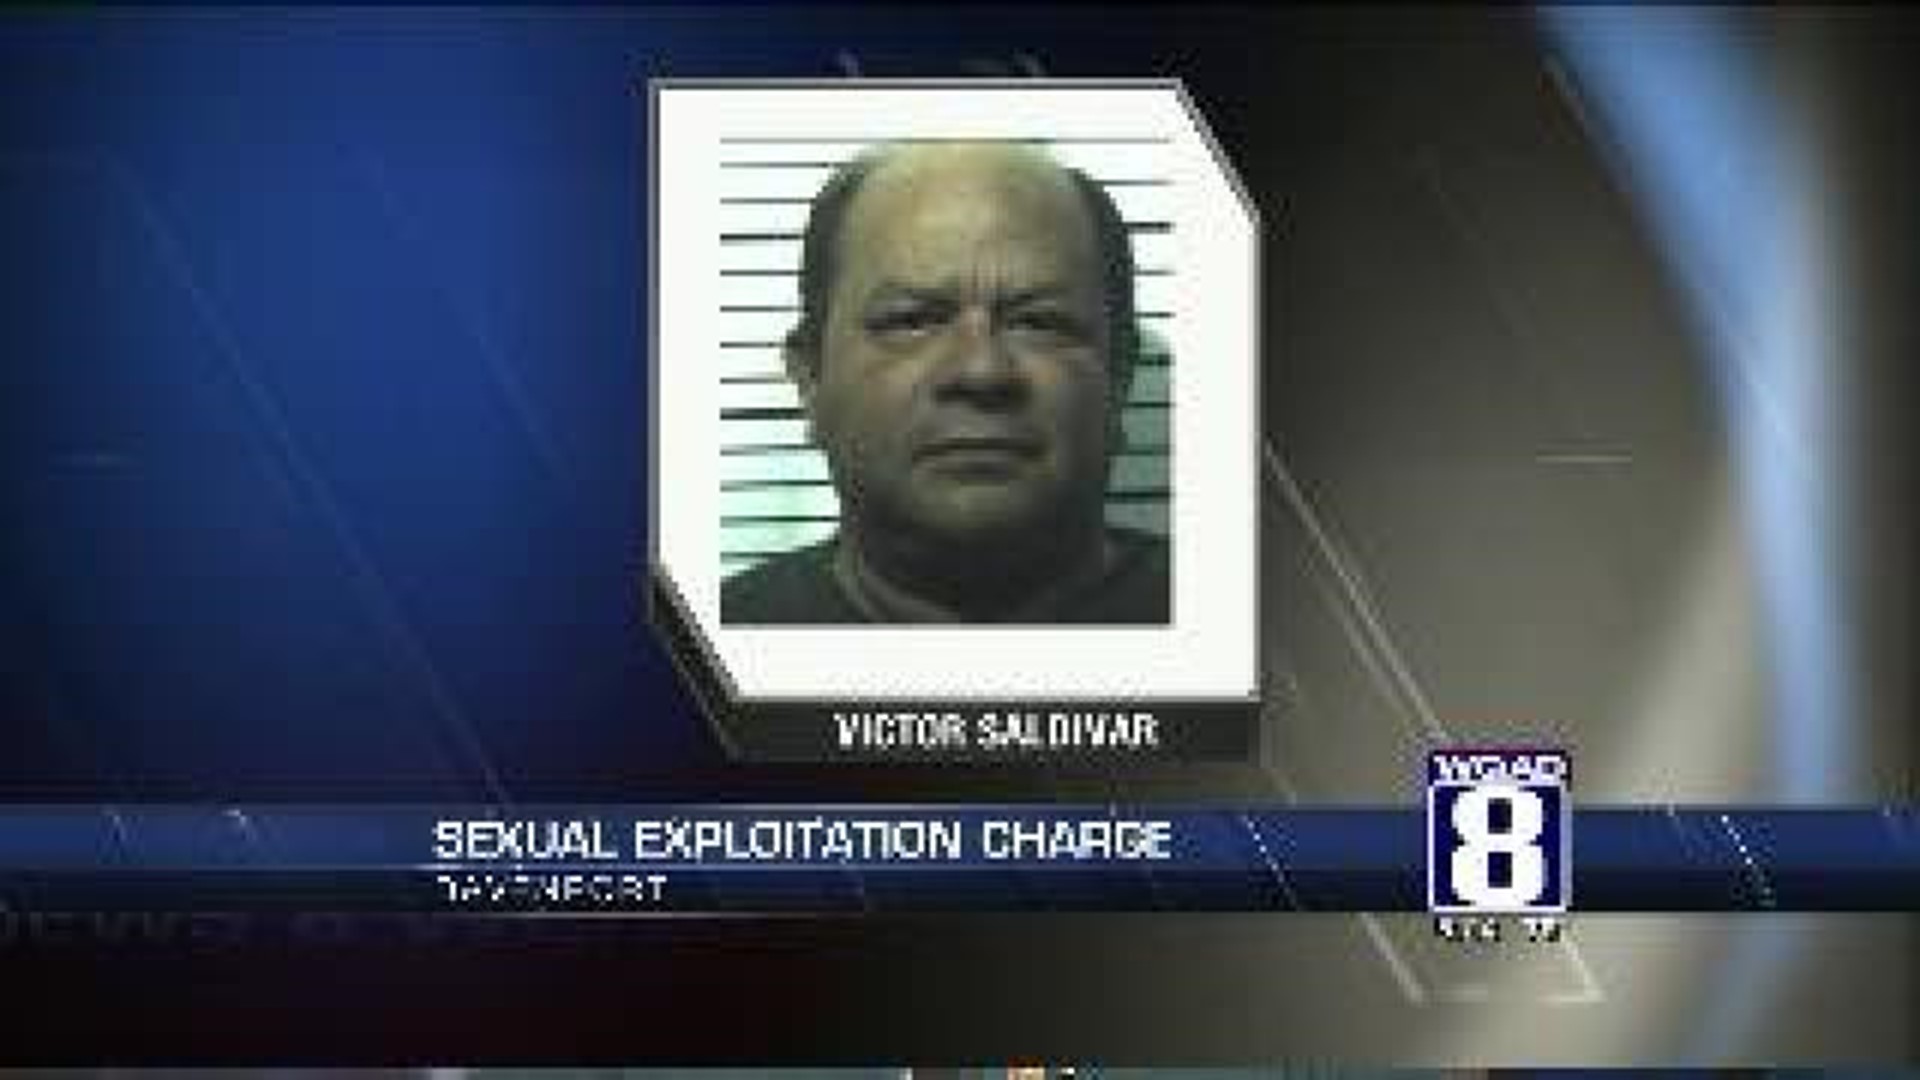 Davenport man charged with sexual exploitation